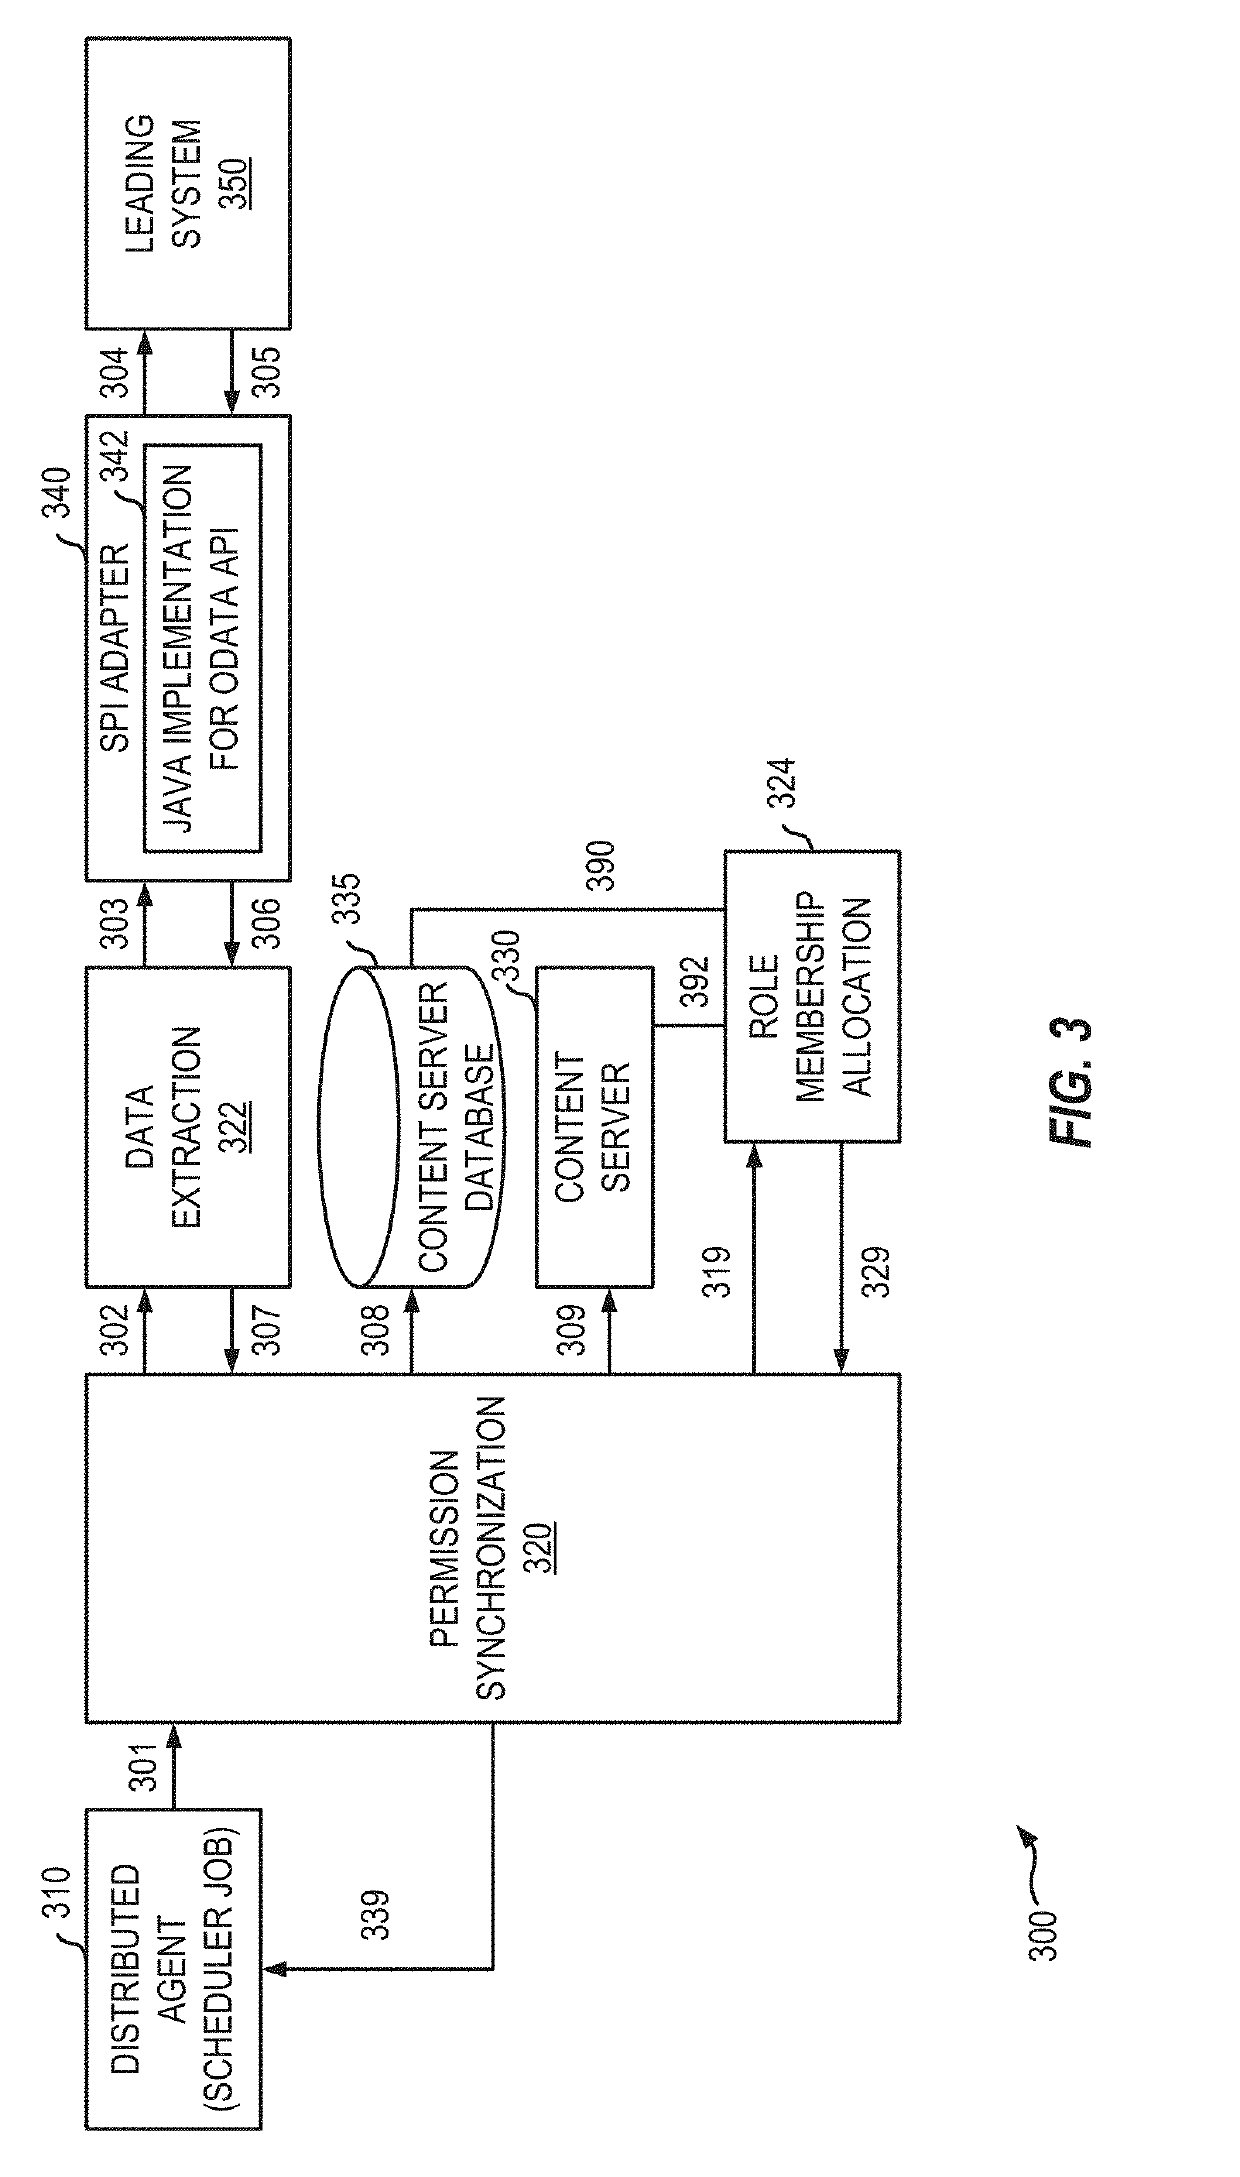 Systems and methods for role-based permission integration